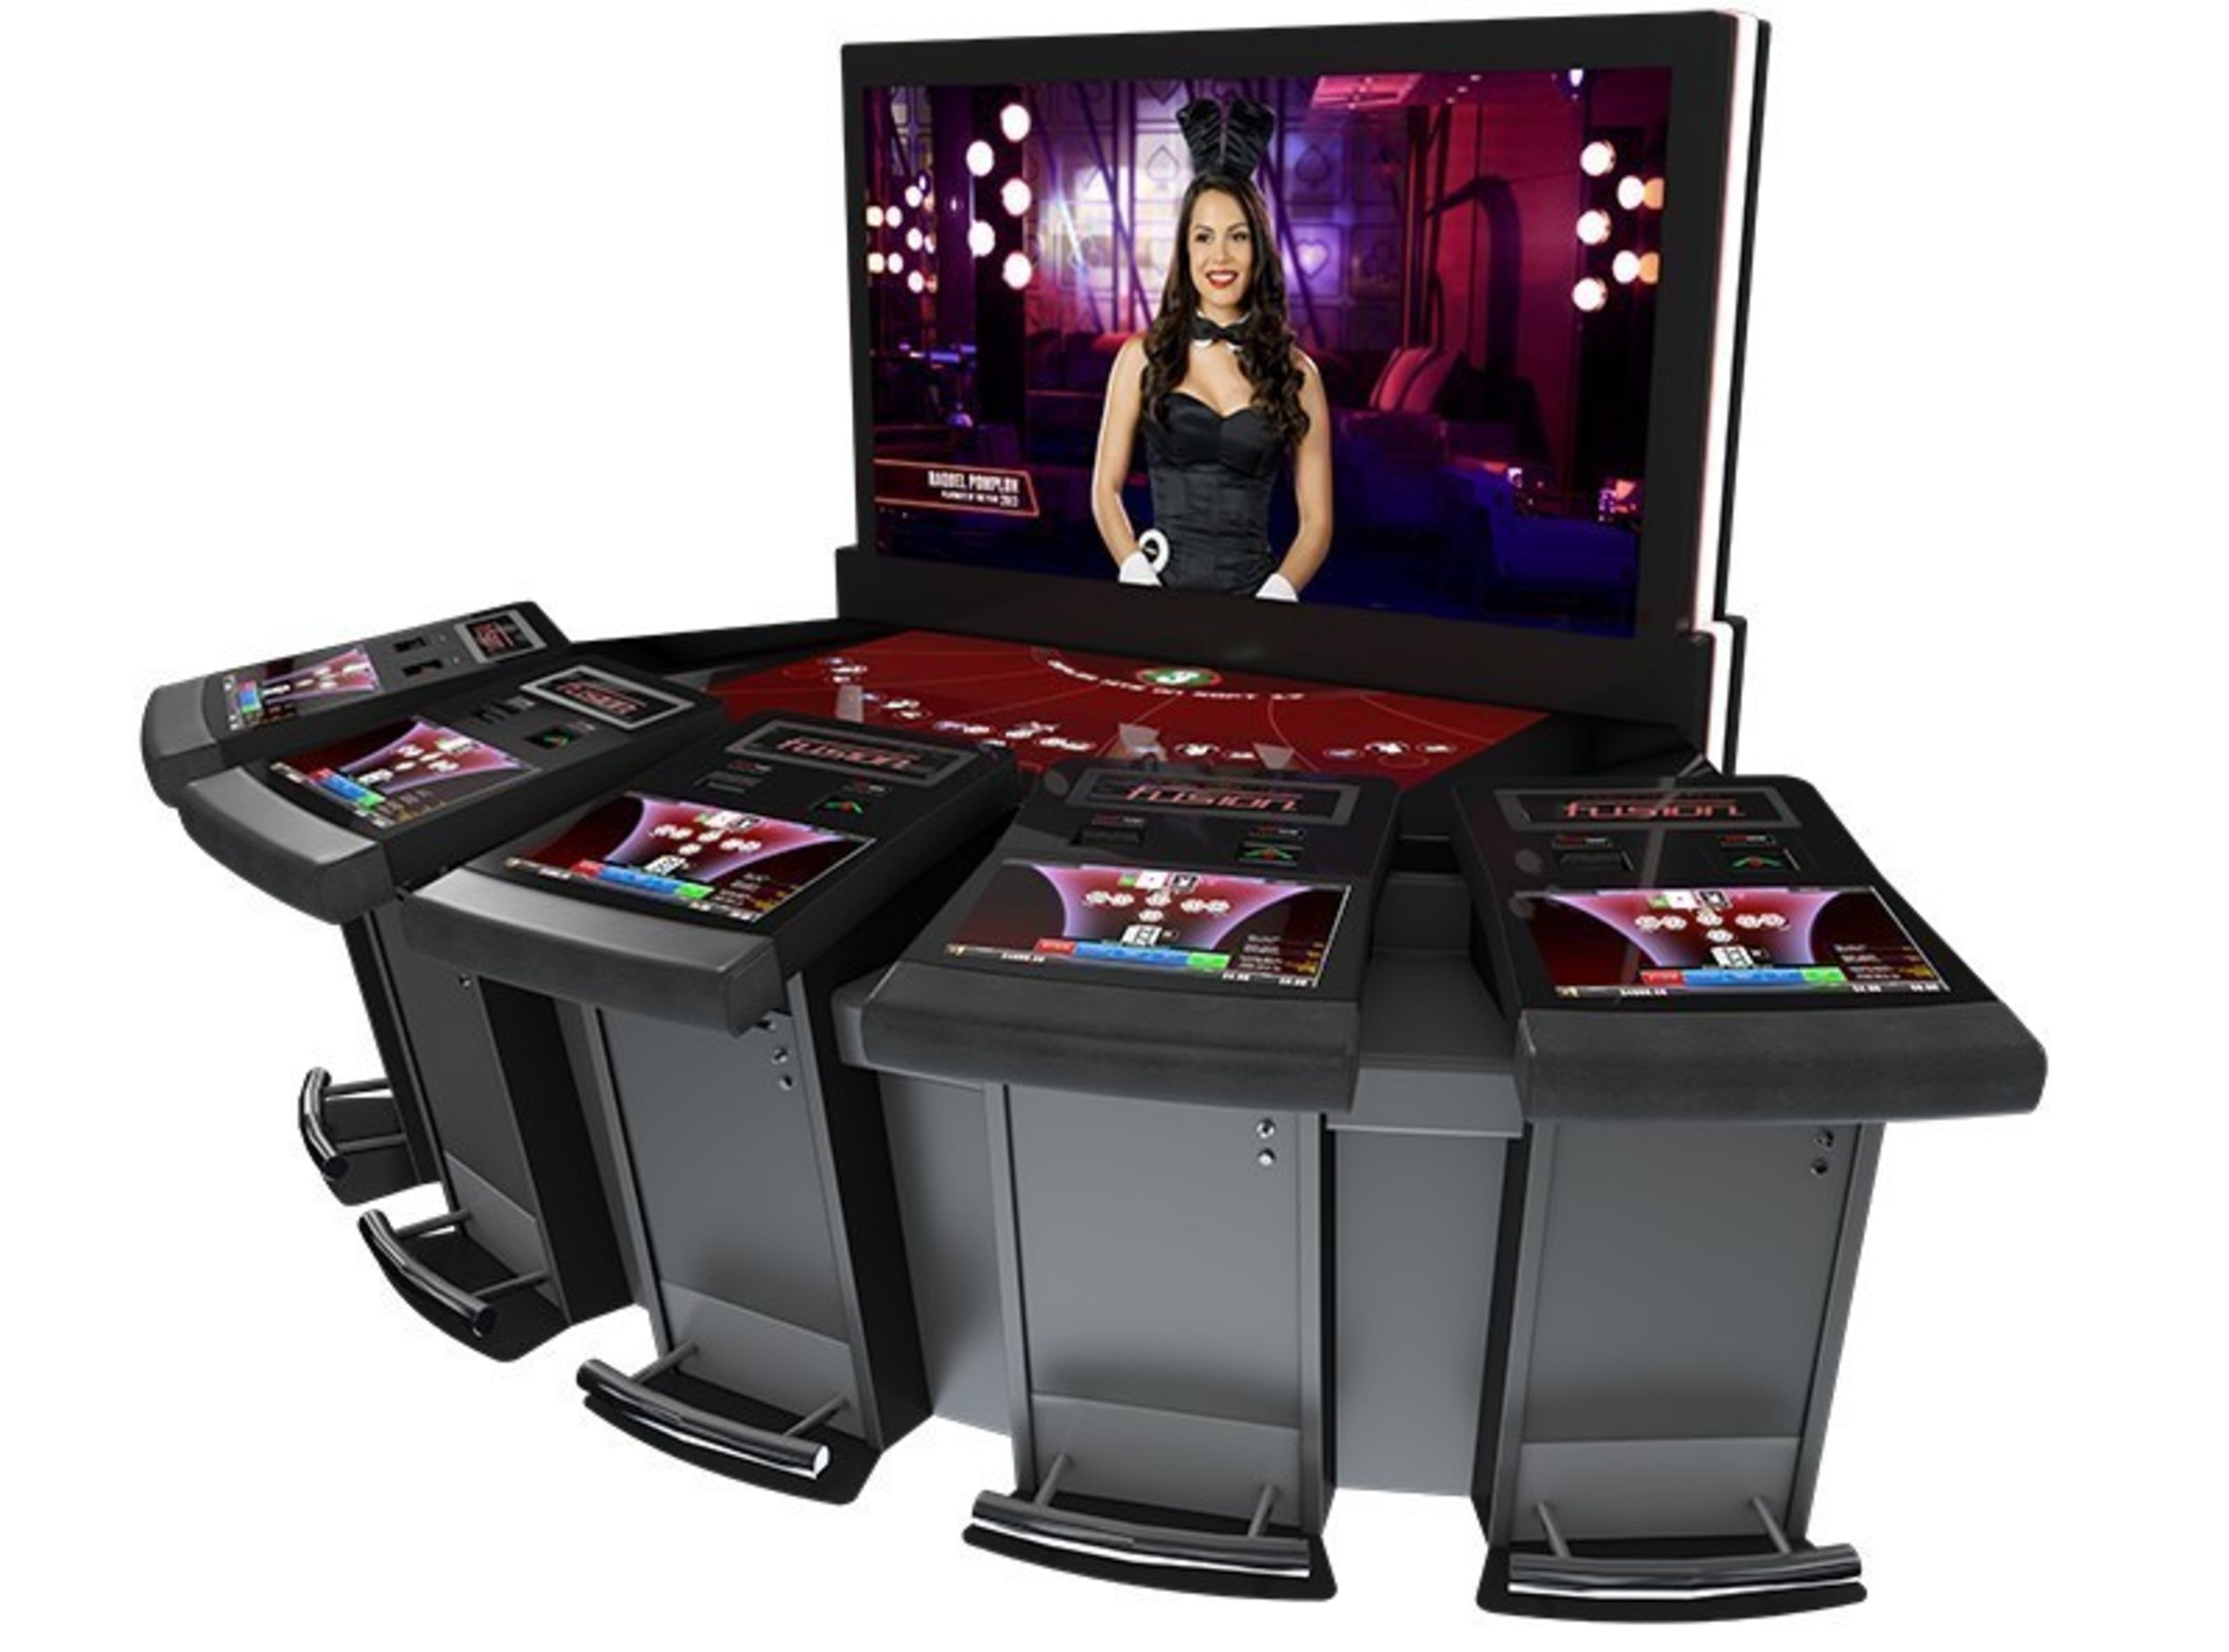 Created with the Millennial in mind, Scientific Games electronic table systems empower community play with the PRIZM Game Table, an industry first, featuring Table Master(R) Fusion PLAYBOY(TM) Bonus Blackjack.